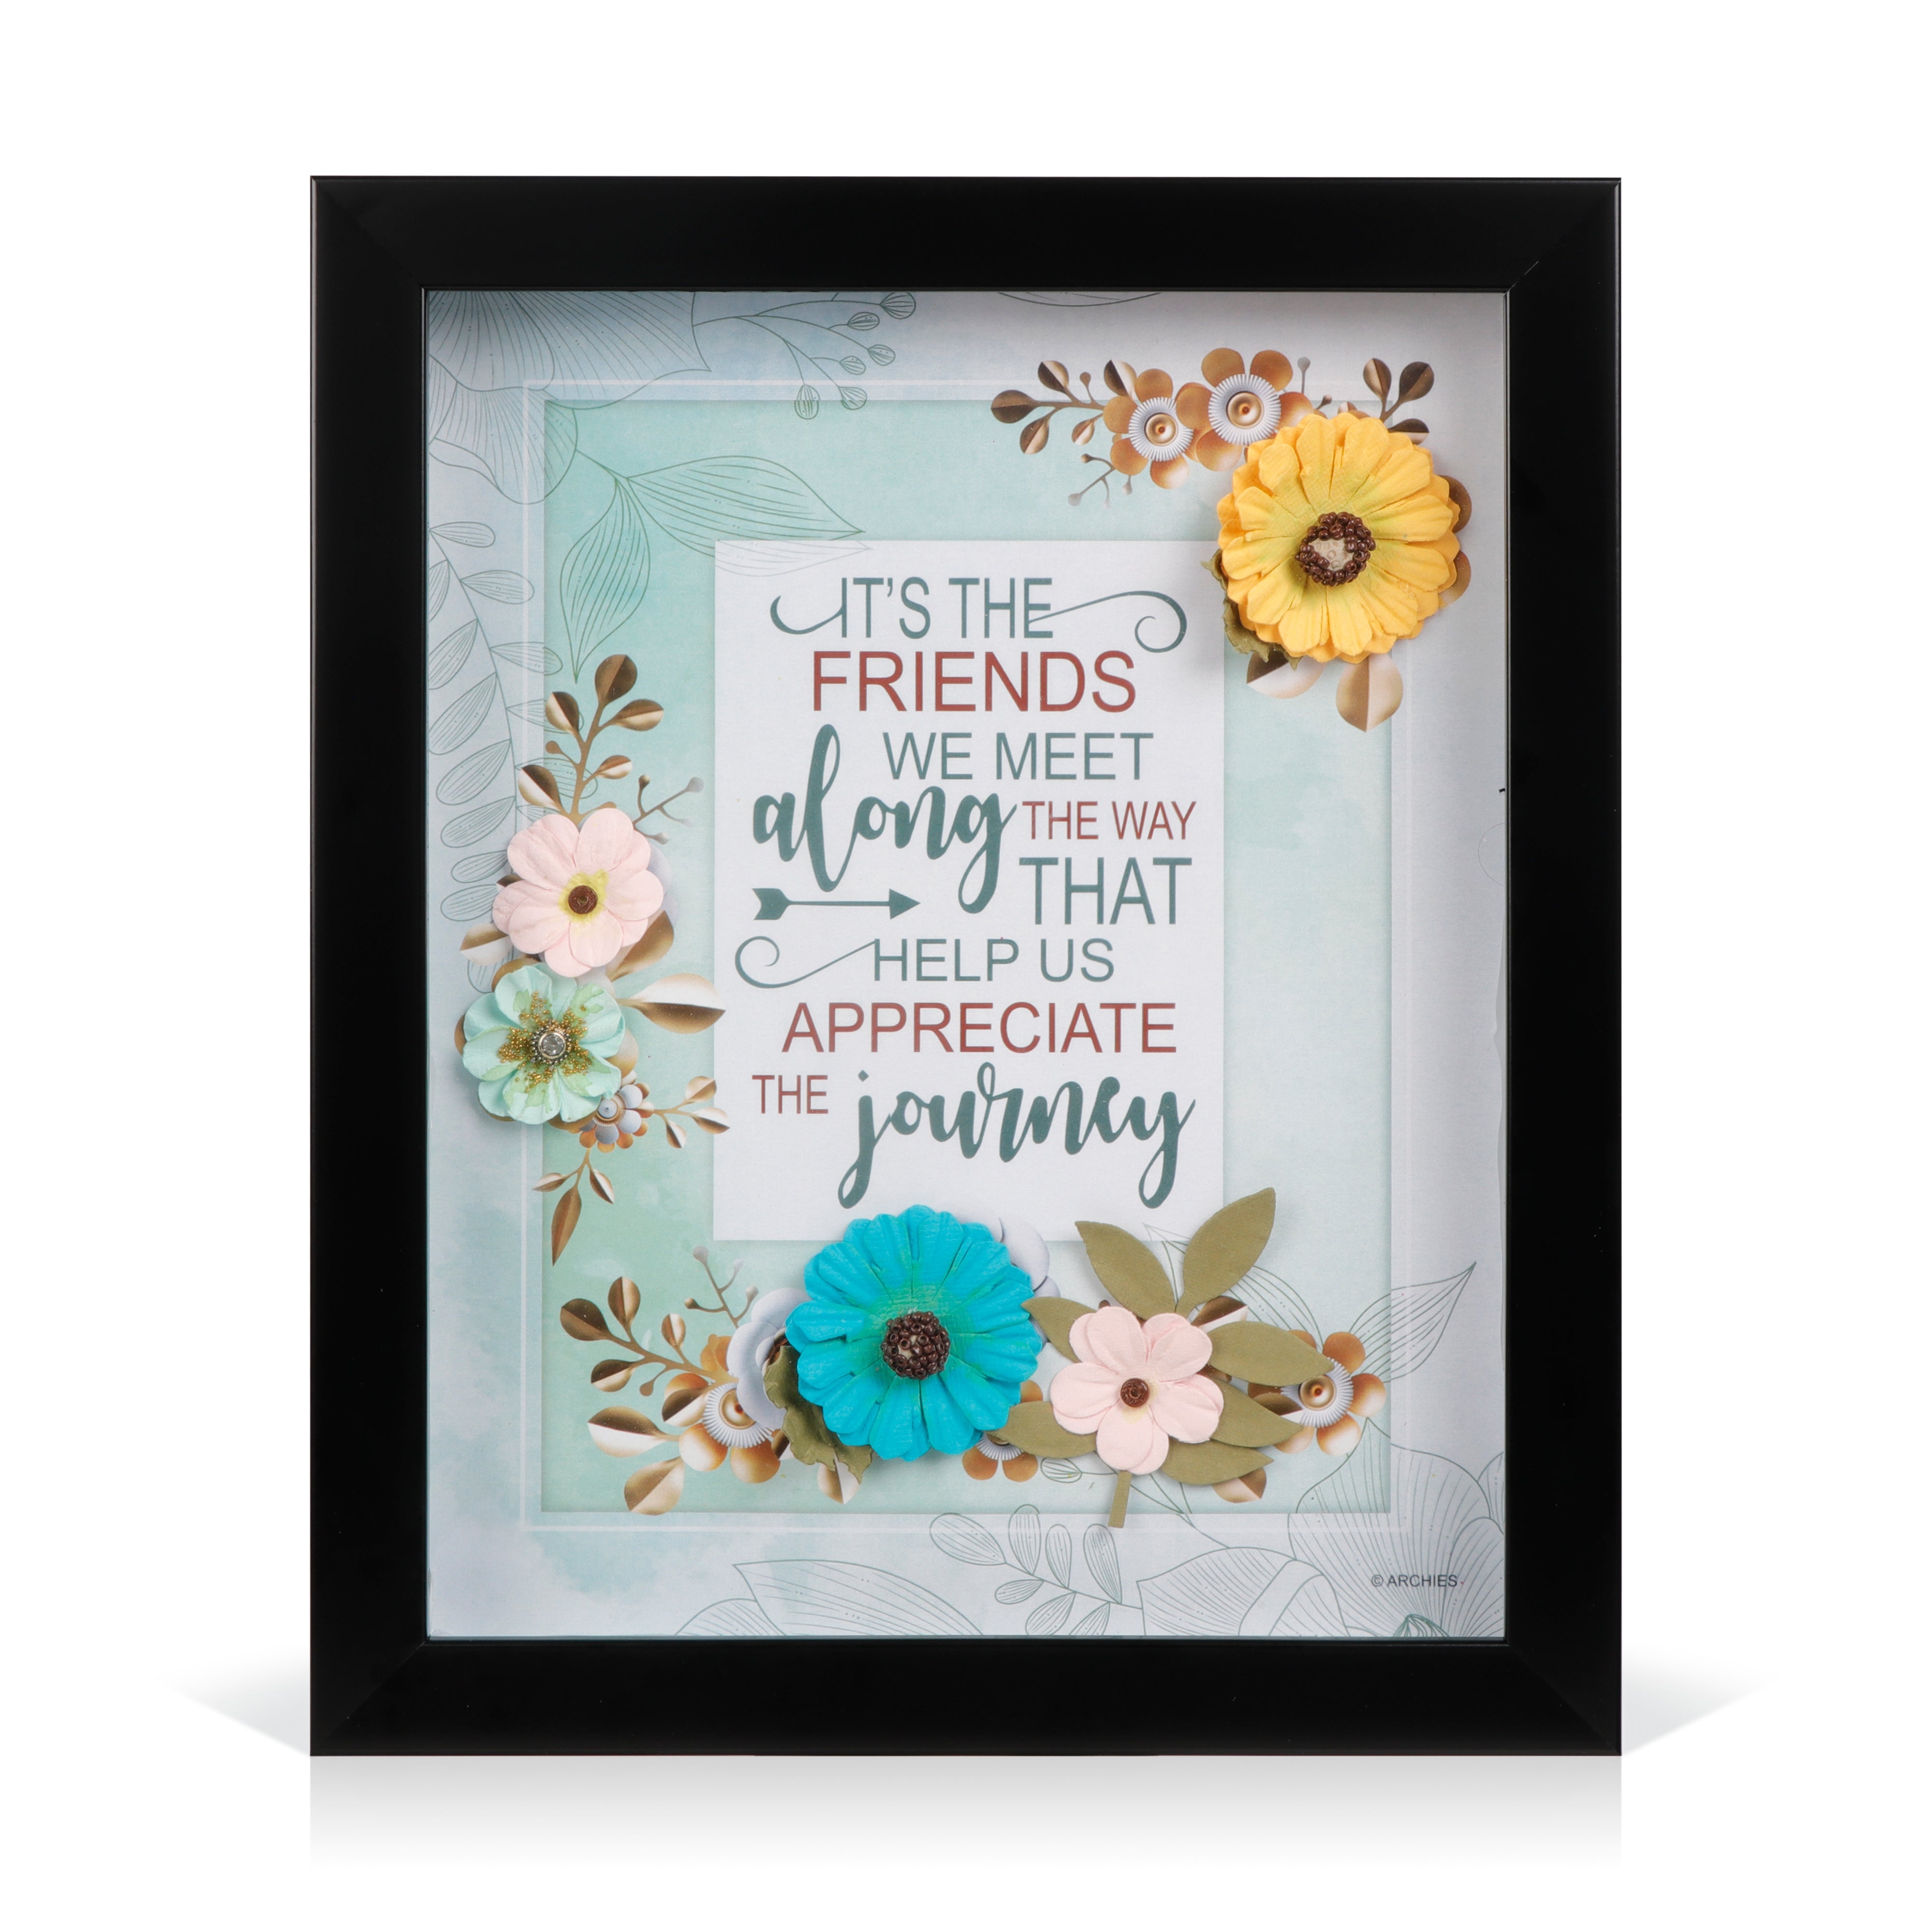 Archies KEEPSAKE QUOTATION - ITS FRIENDS WE MEET..... For gifting and Home décor